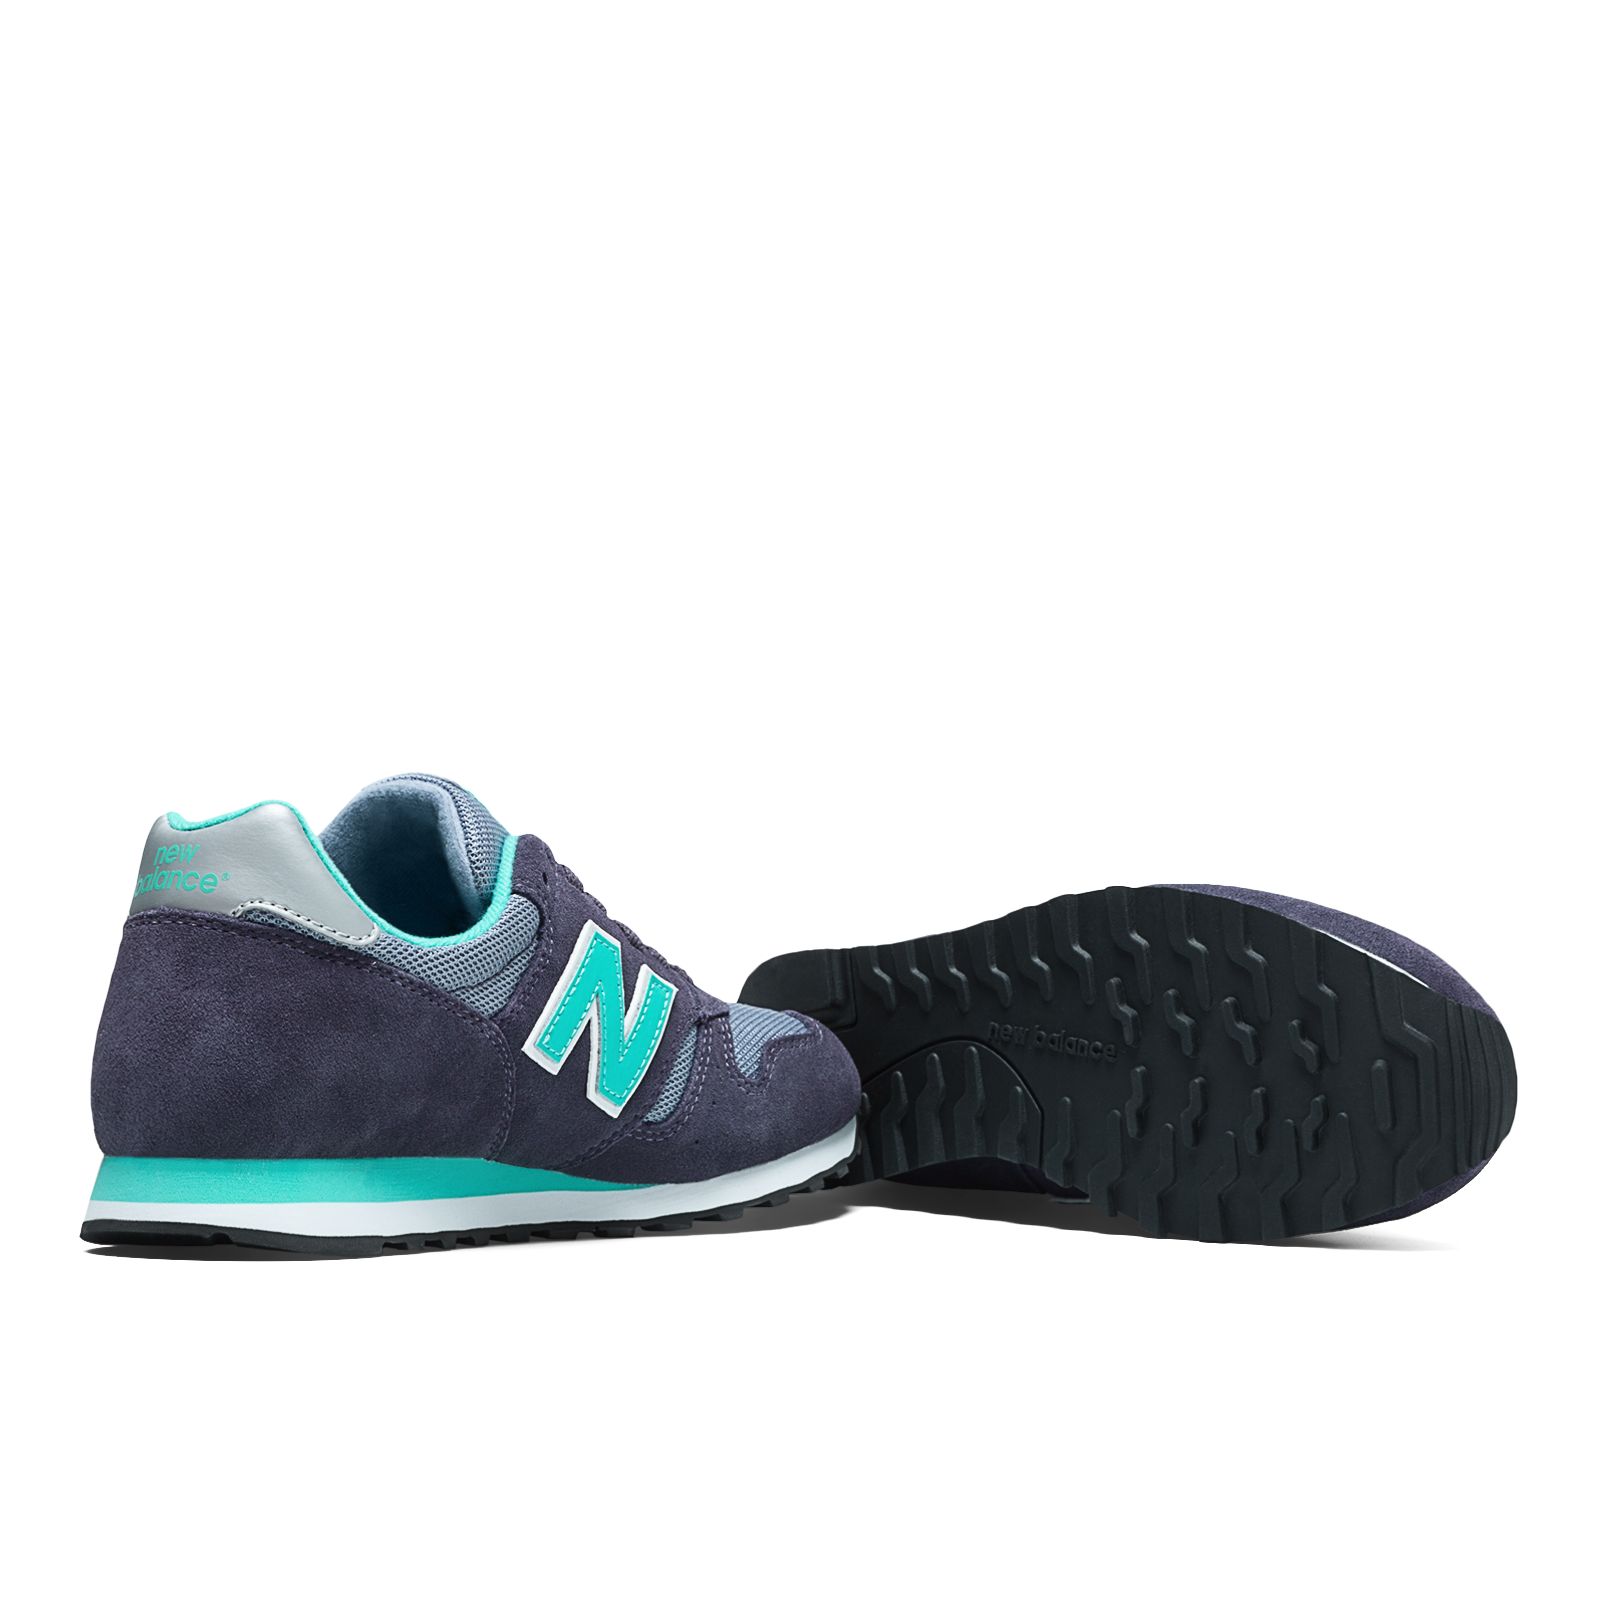 New Balance W373 on Sale - Discounts Up to 15% Off on W373SPM at Joe's New  Balance Outlet